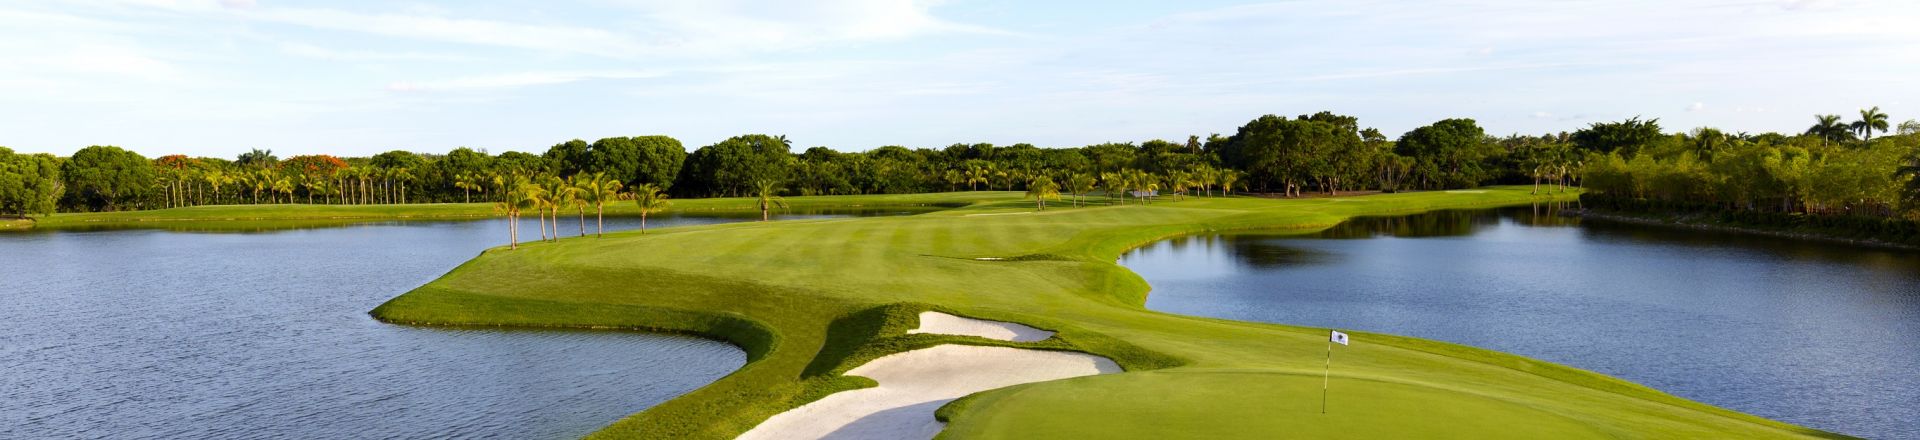 Play golf in Florida at Golden Palm Golf Course, Trump National Doral